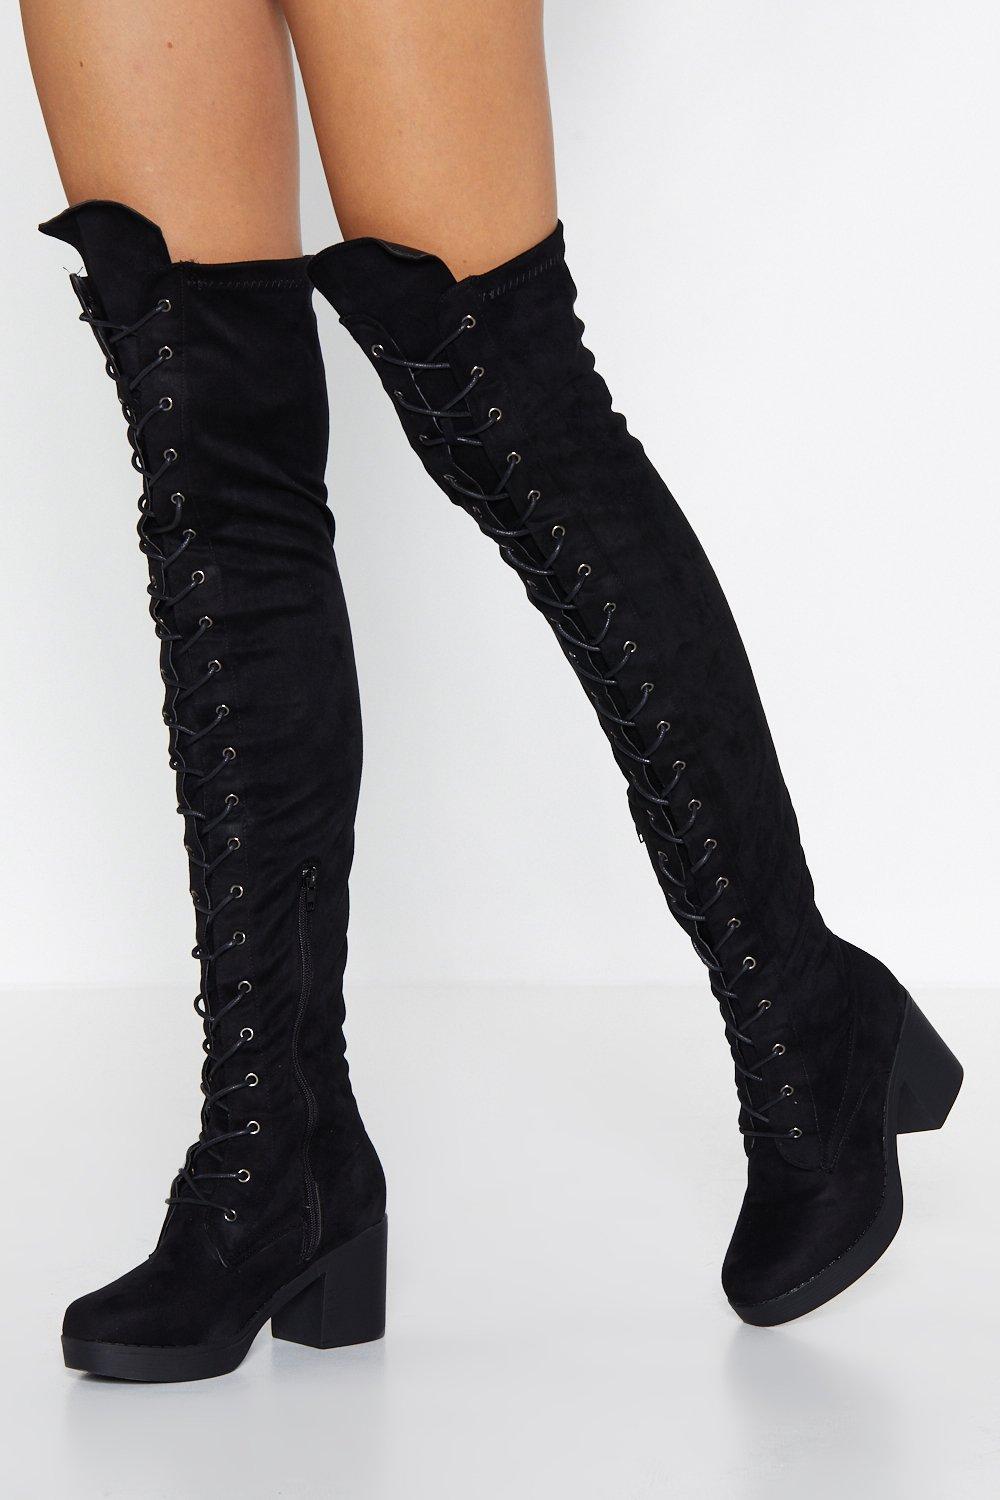 high boots over knee